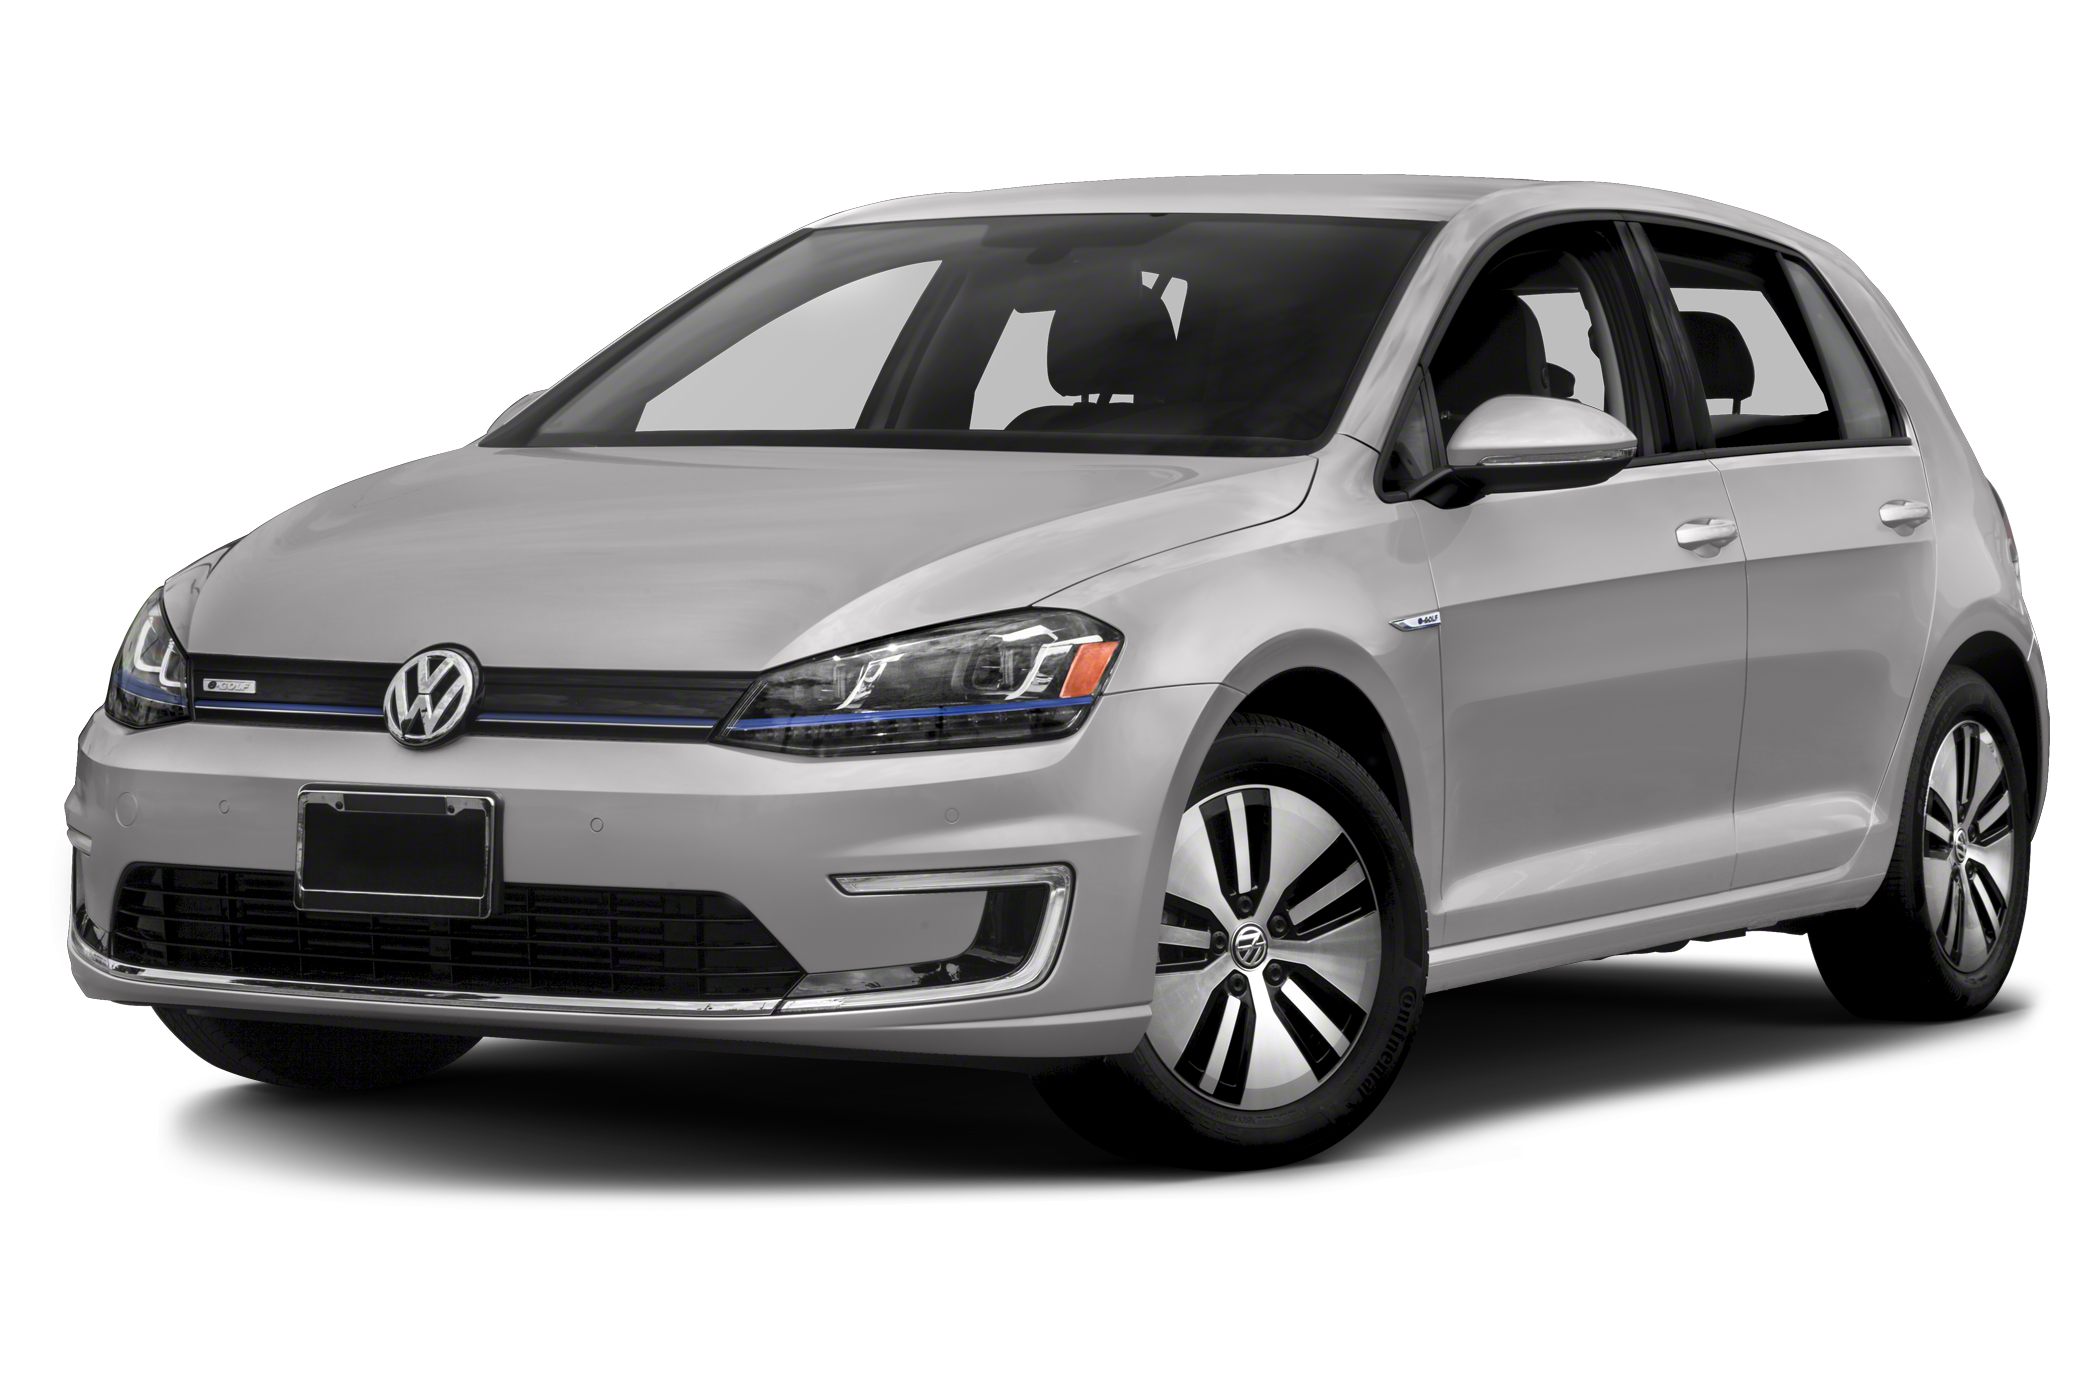 2015 Volkswagen E-Golf oem parts and accessories on sale